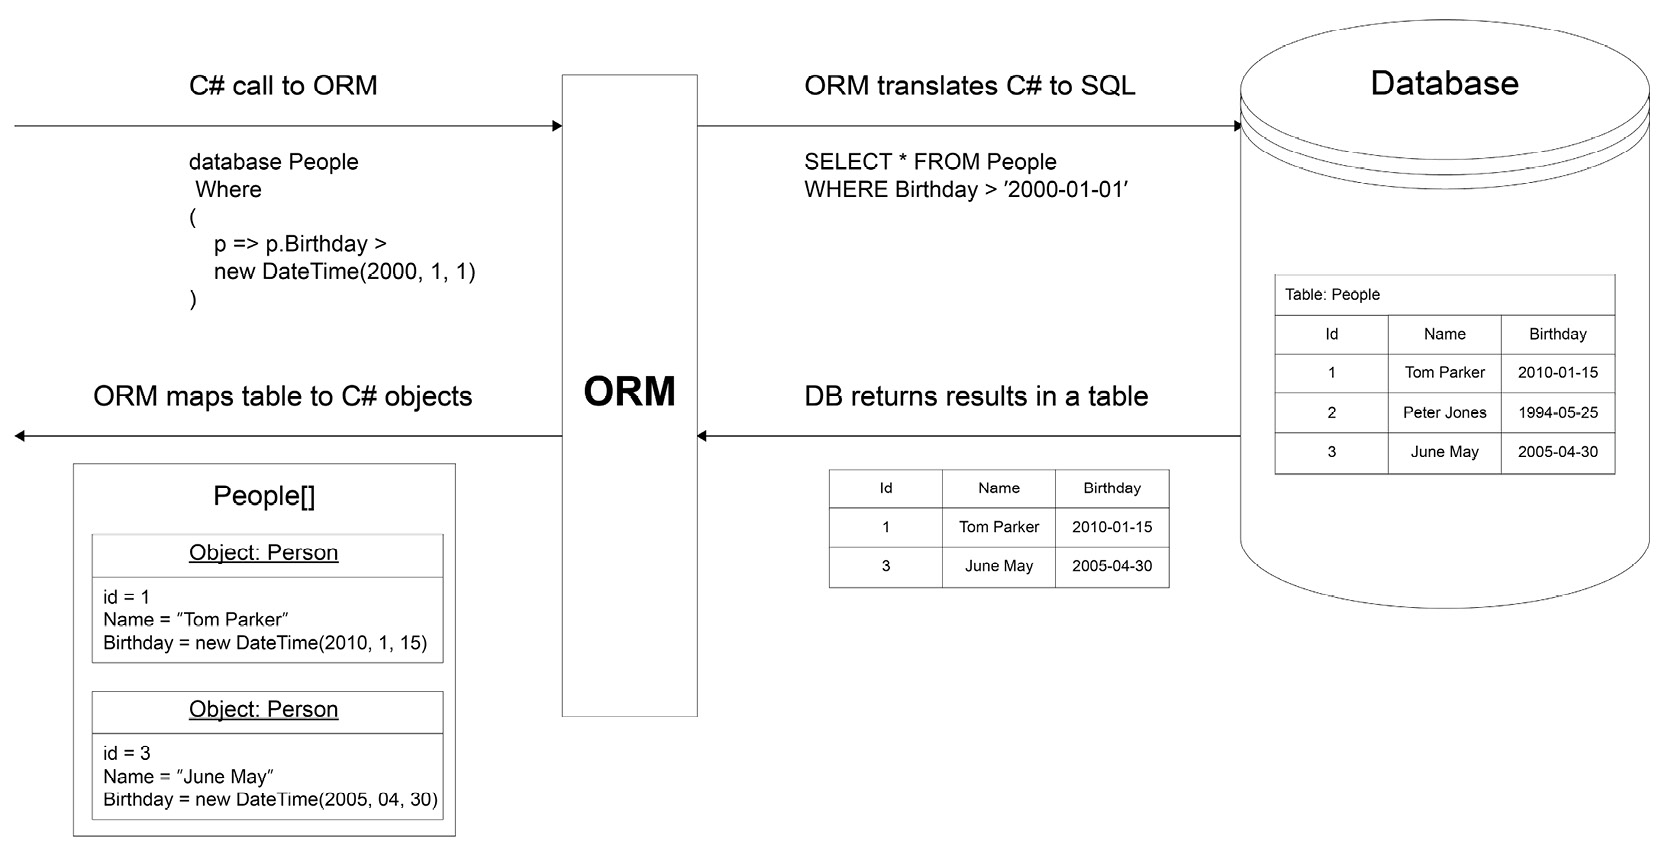 Figure 6.1: How an ORM works in translating C# to SQL and back
